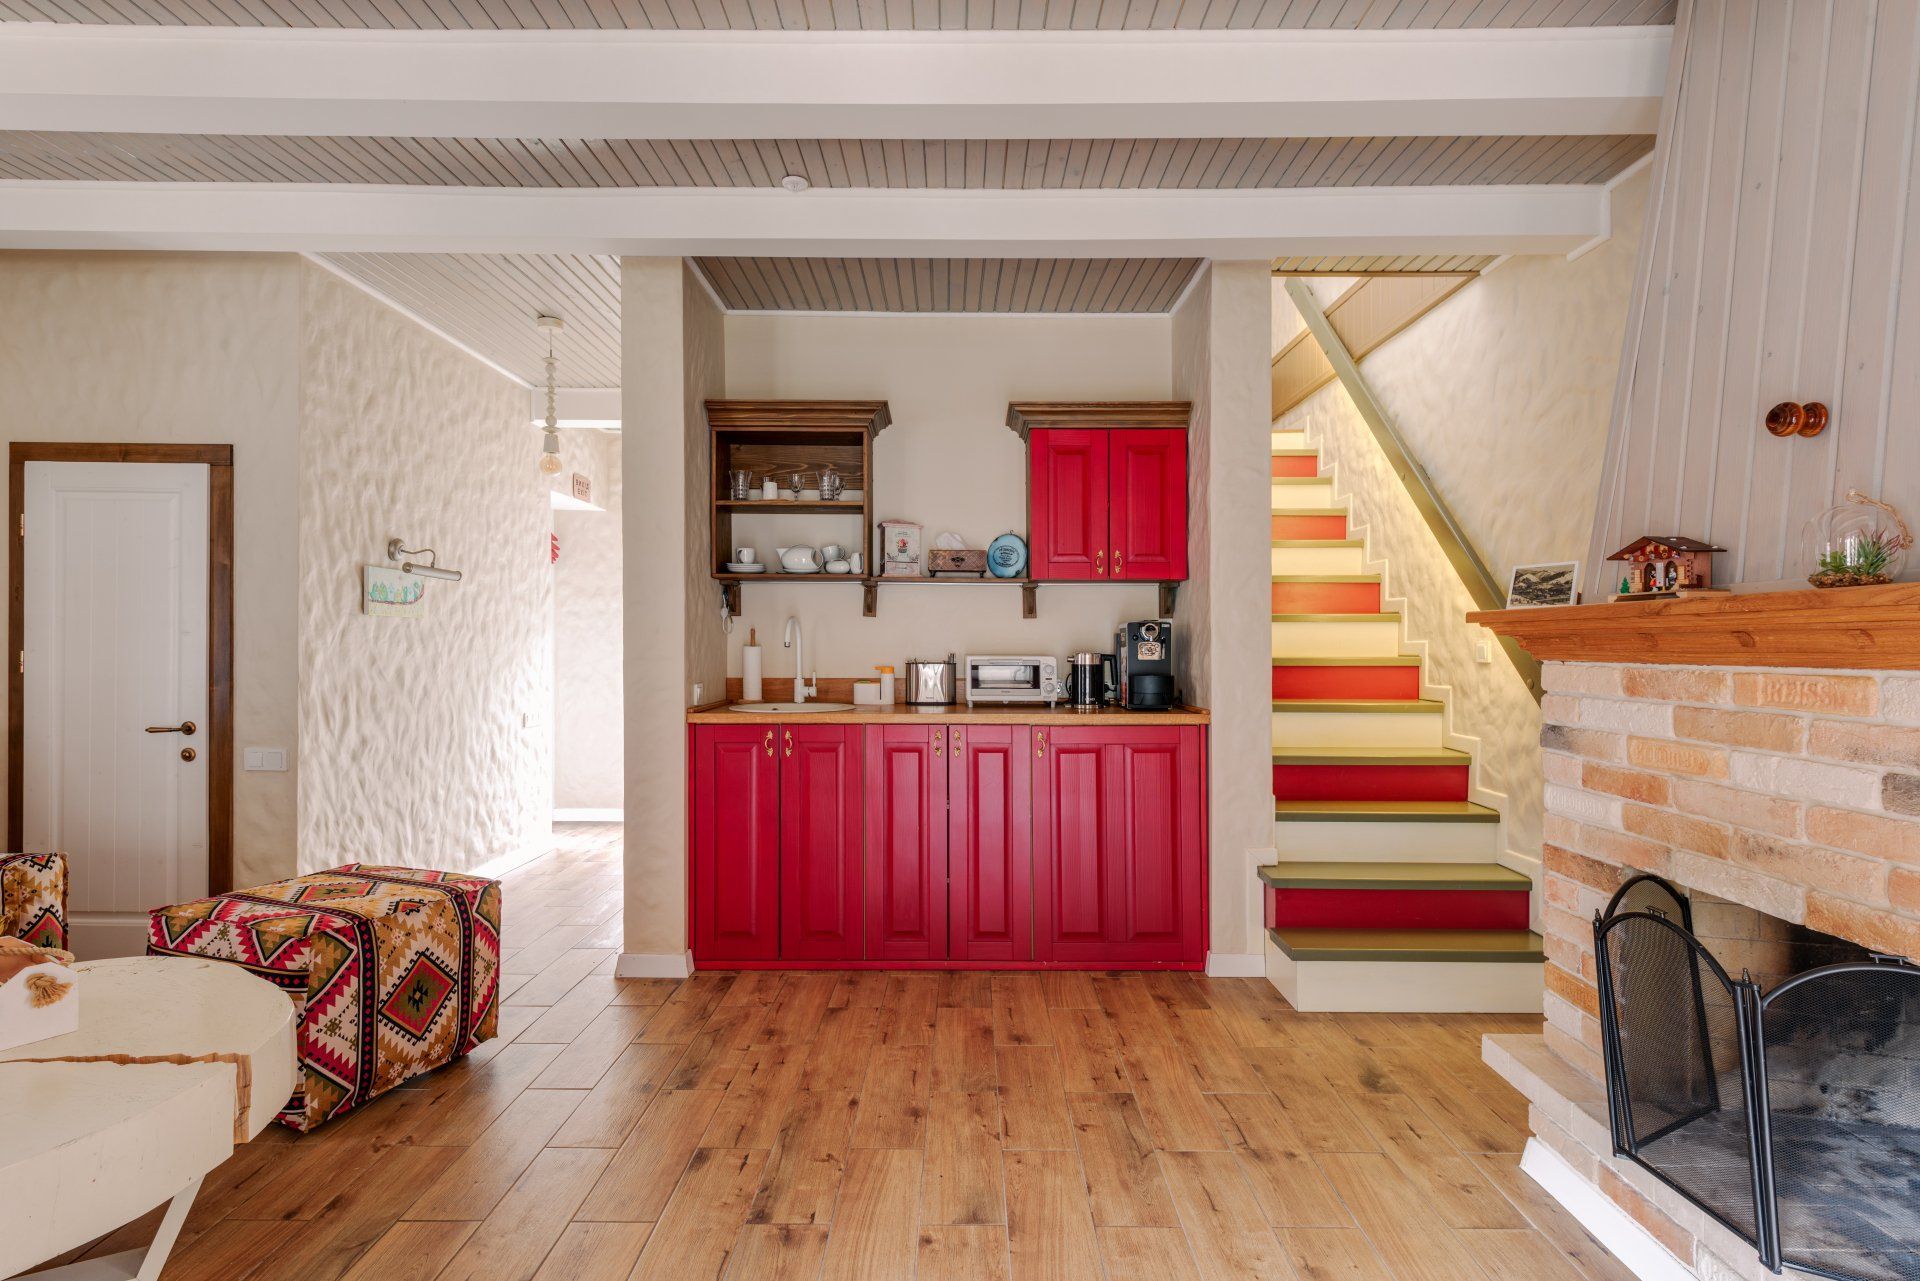 A living room with red cabinets , laminate flooring and stairs leading up to the second floor.